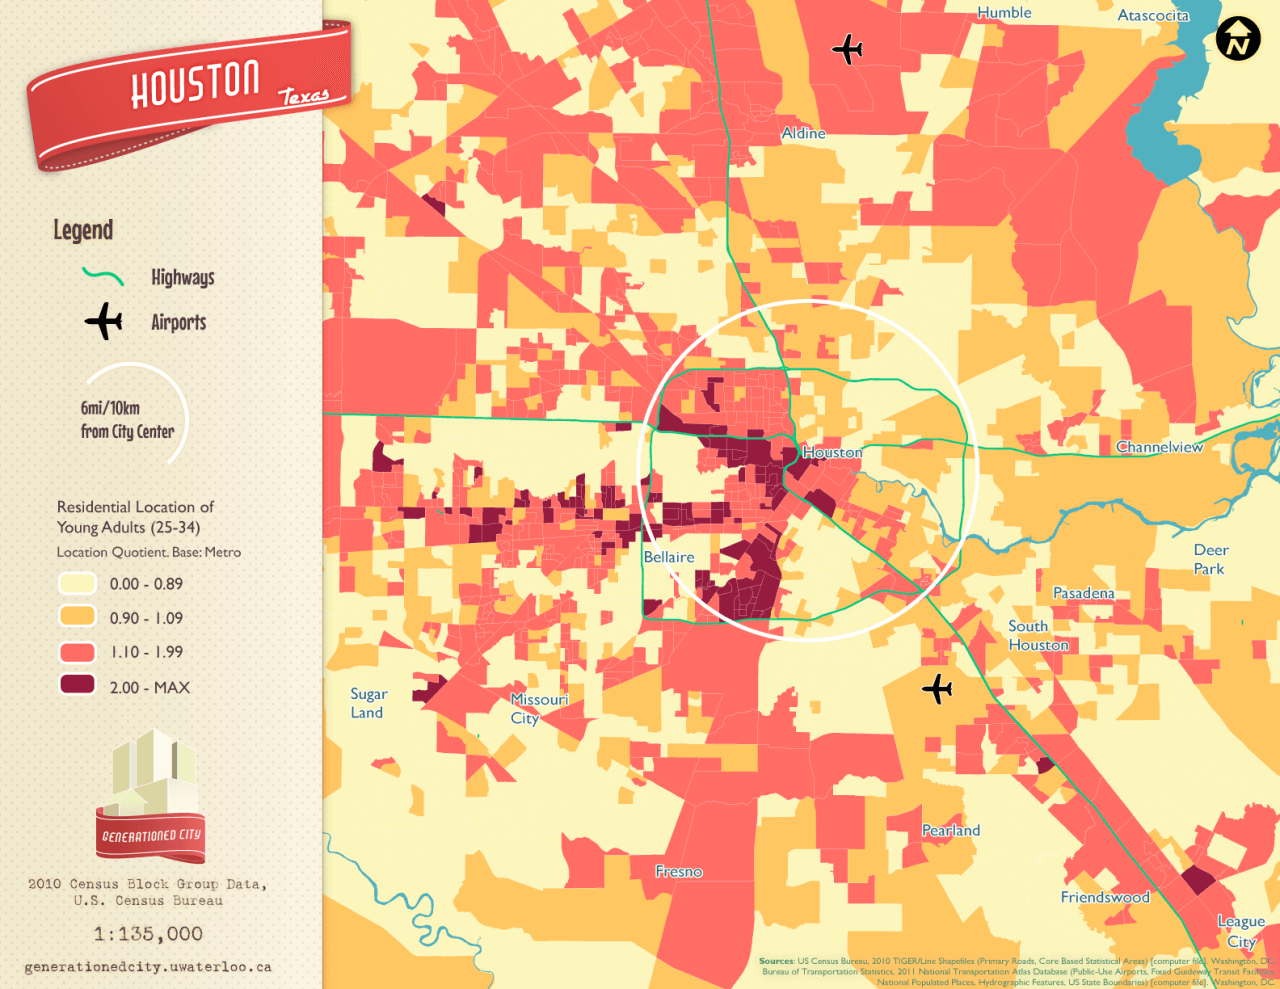 Residential location of young adults in Houston.